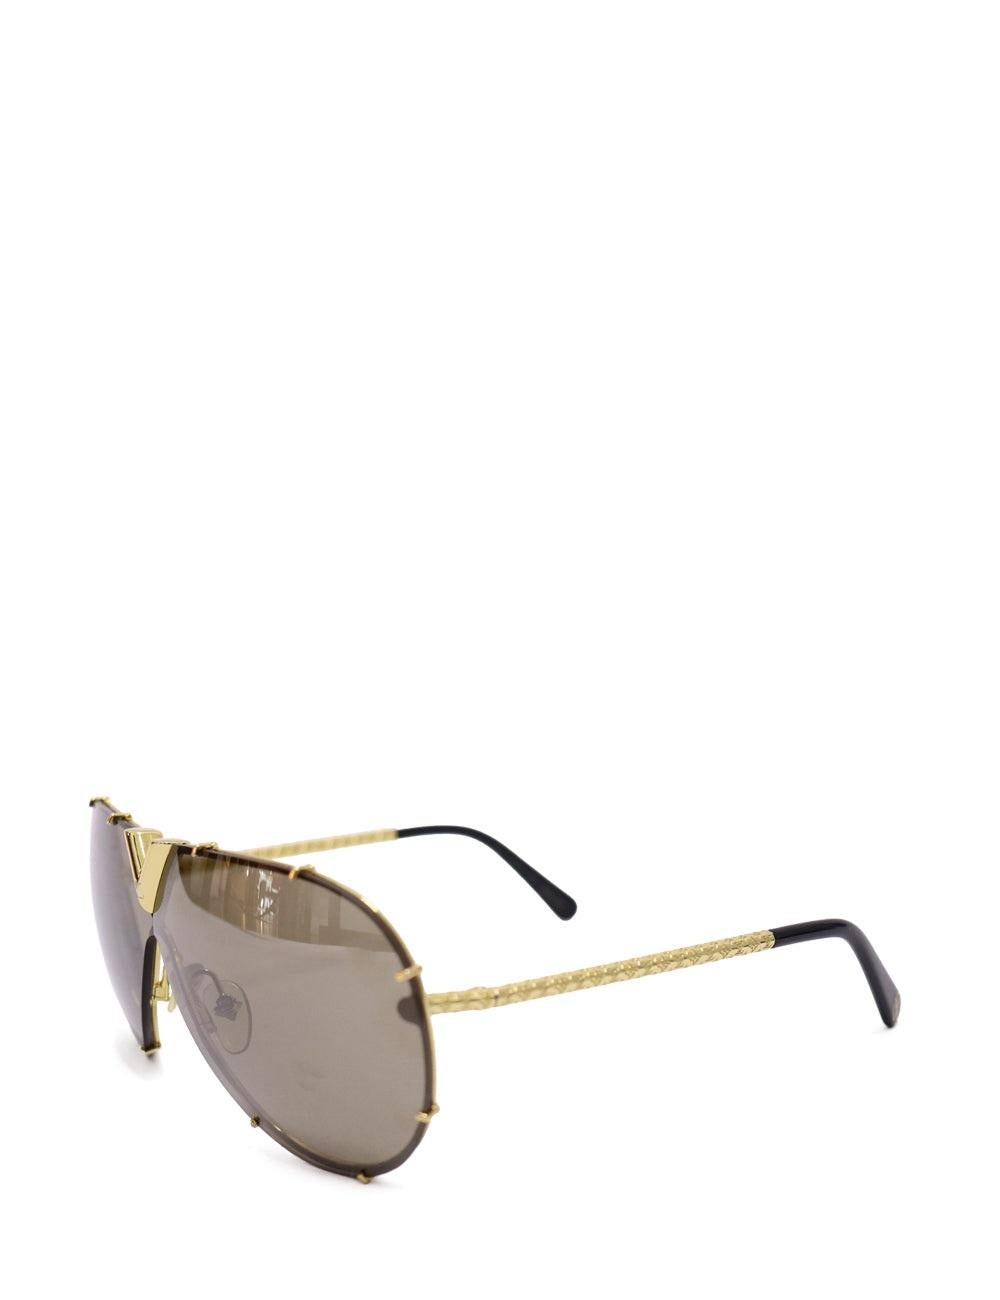 Louis Vuitton LV Drive Sunglasses with gold arms detailed and a mini monogram engravings.

Additional information:
Hardware: Acetate
Lens: Brown
Measurements: 14 W x 13.3 L x 5.7 H cm
Overall condition: Excellent
Extras: Includes original box
